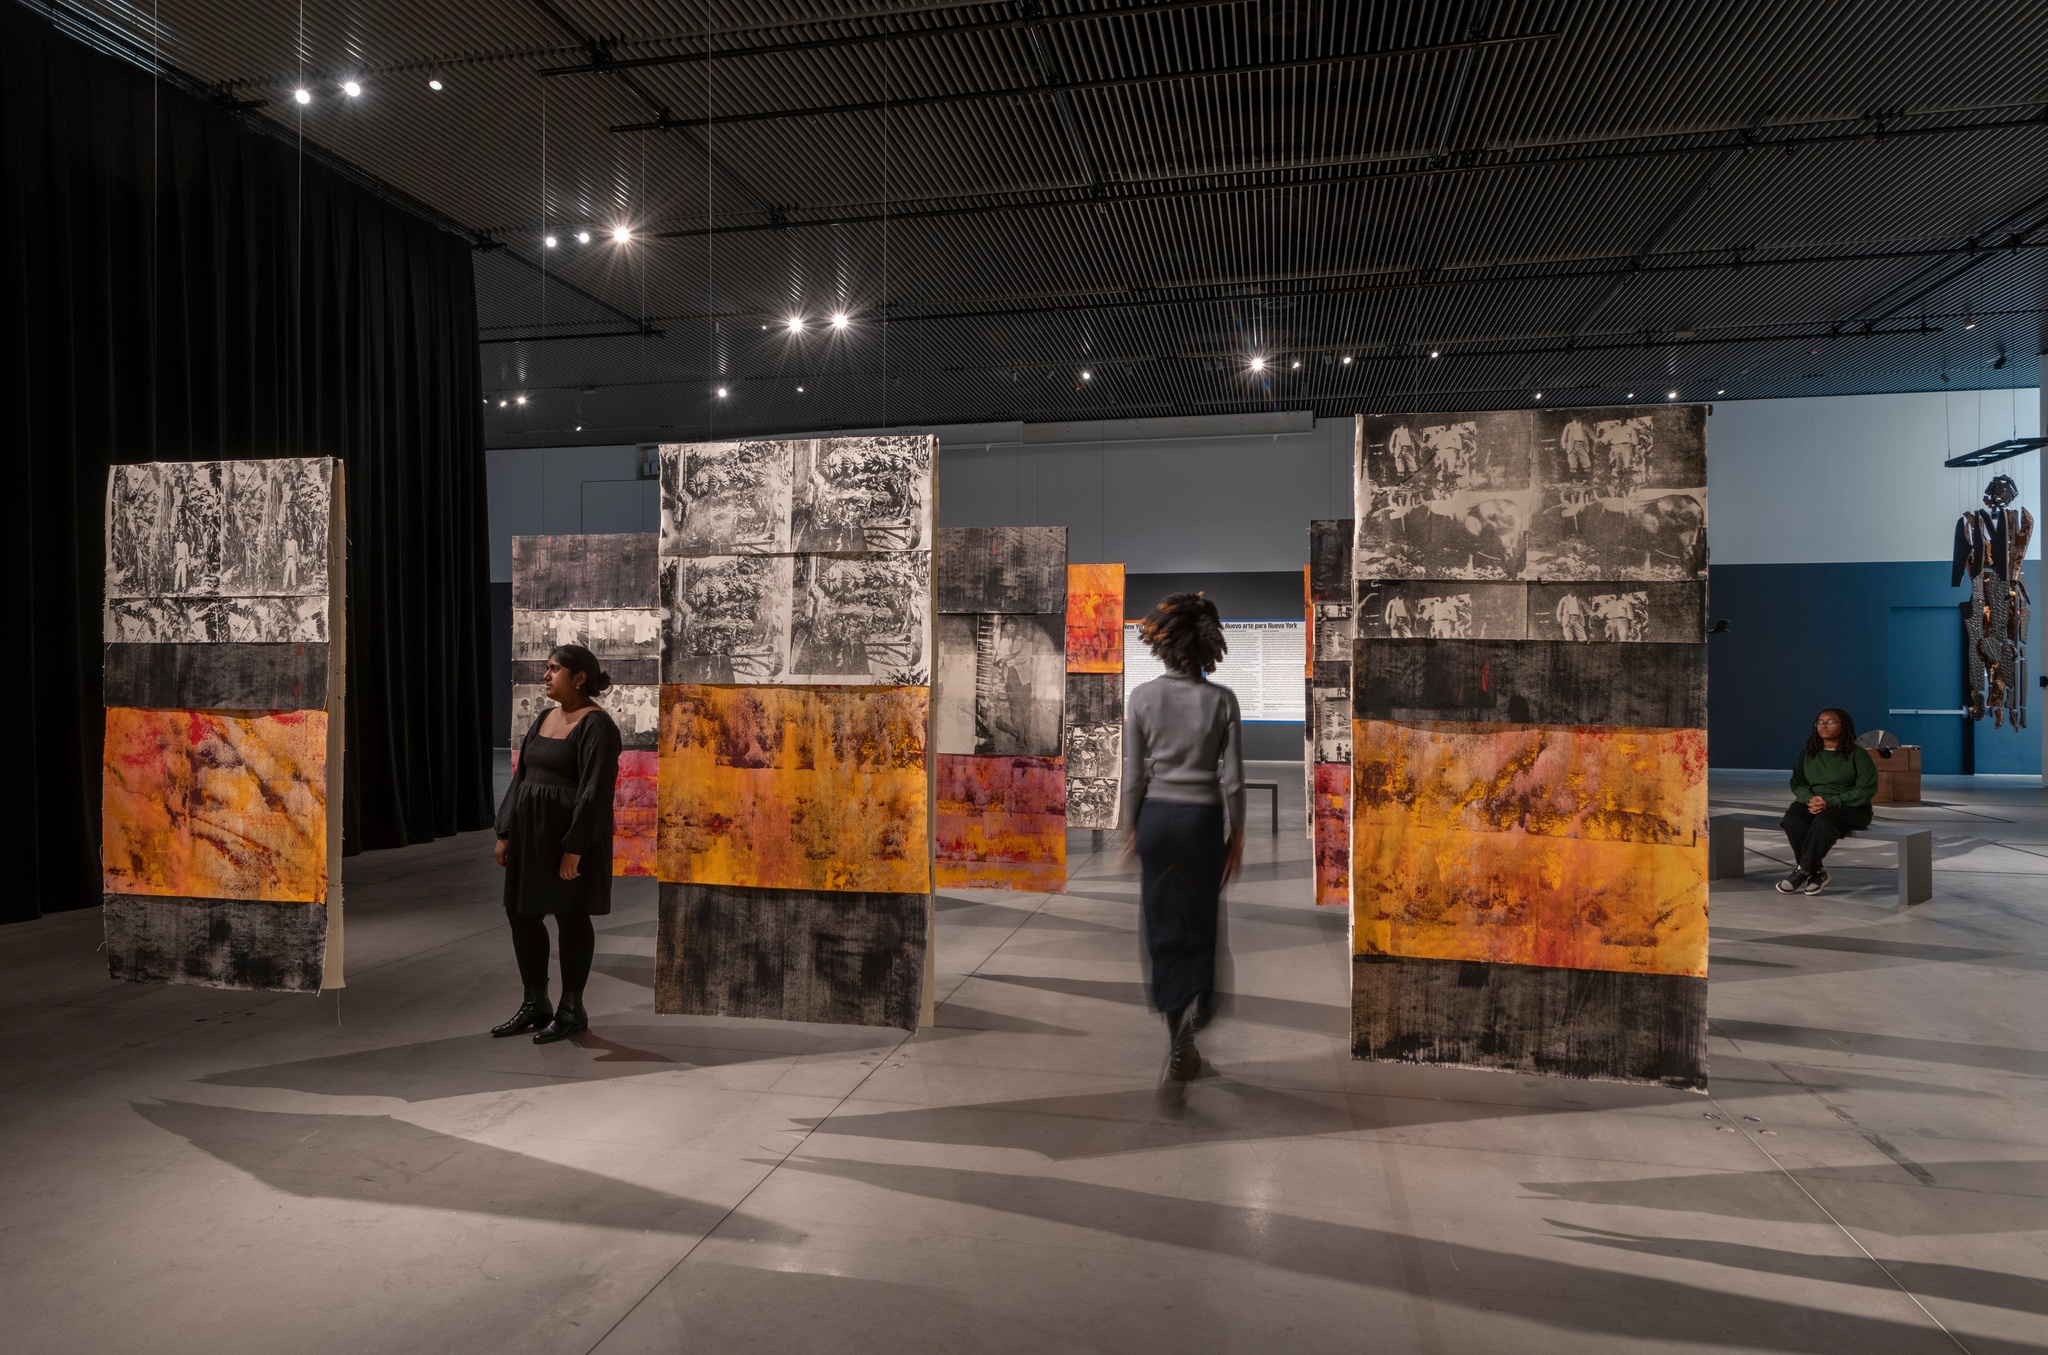 Nine painted fabric panels hang from a gallery ceiling in a grid. Two gallery visitors walk between the panels. The panels are painted in orange and black bands, with screen printed sections with black and white images of banana plantation workers in the 1920s.